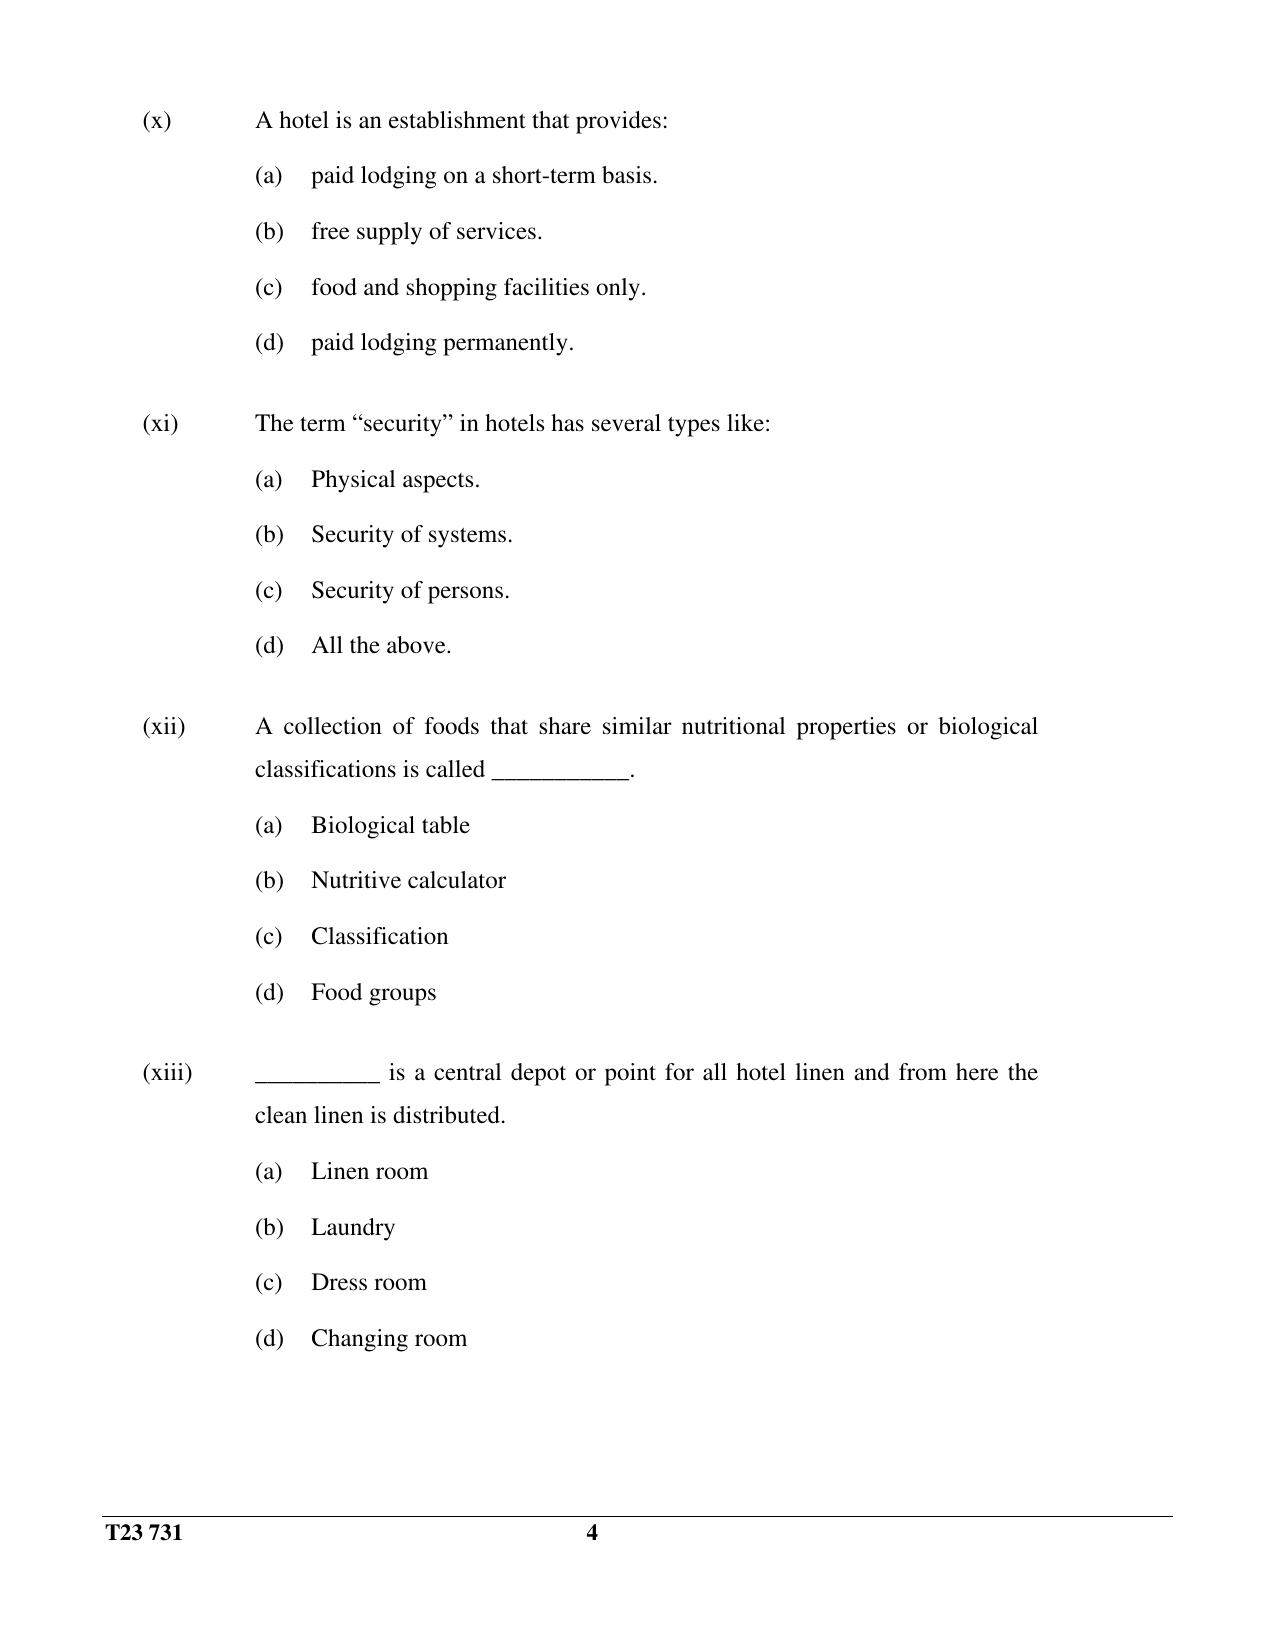 ICSE Class 10 HOSPITALITY MANAGEMENT 2023 Question Paper - Page 4